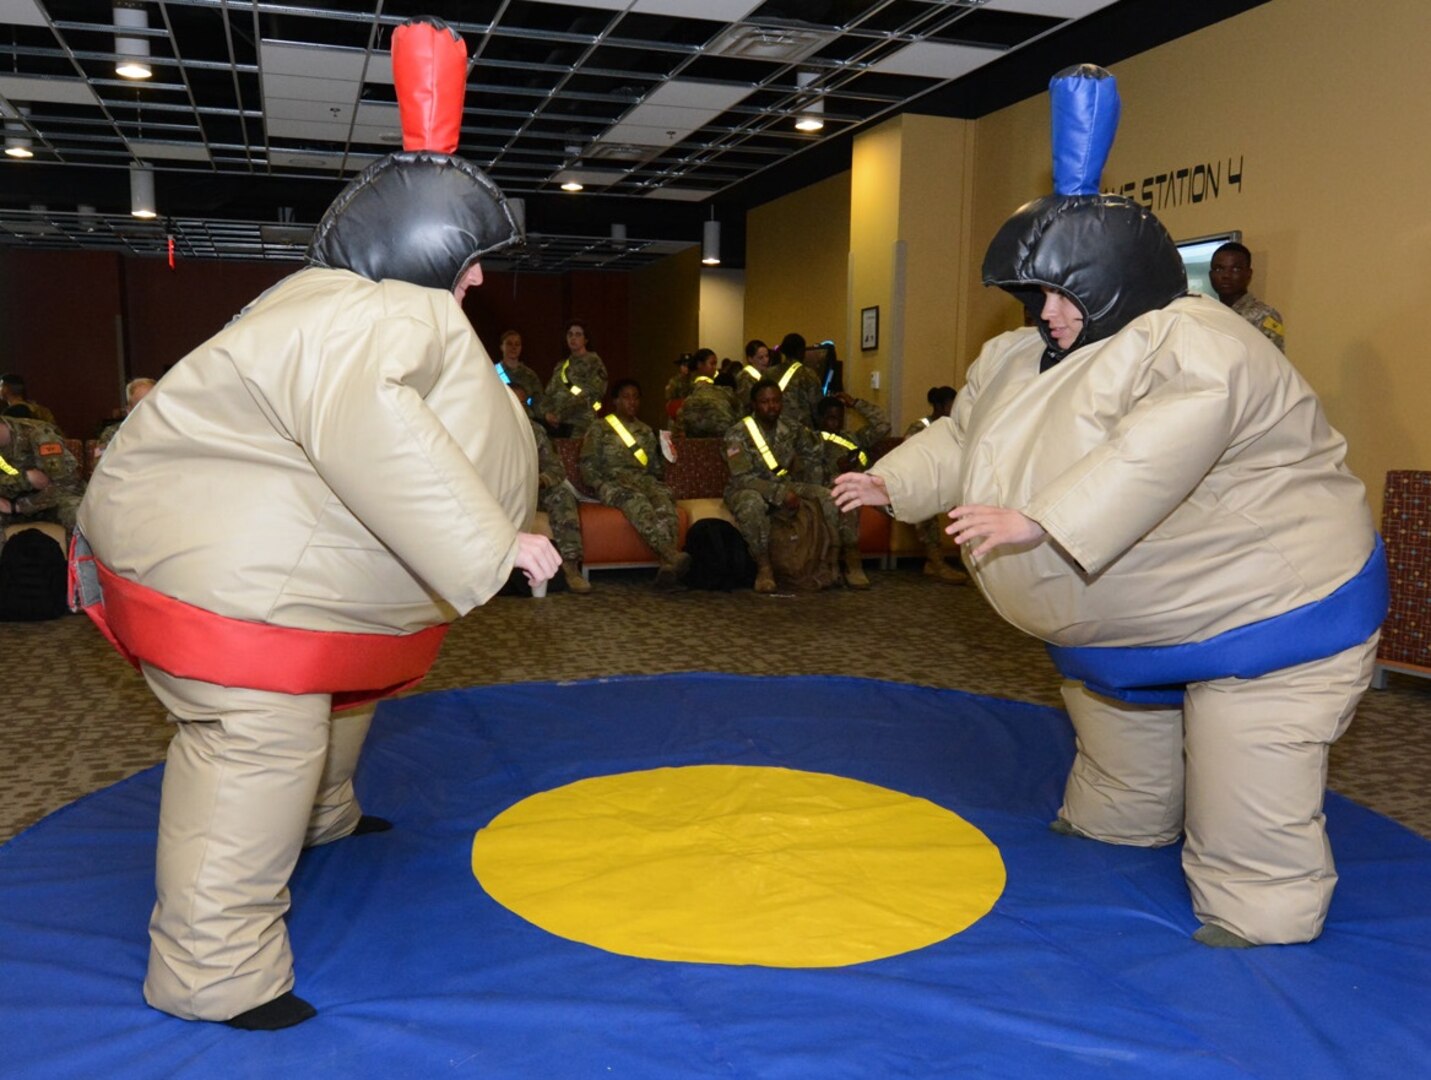 Two Soldiers have fun in Sumo wrestler costumes.